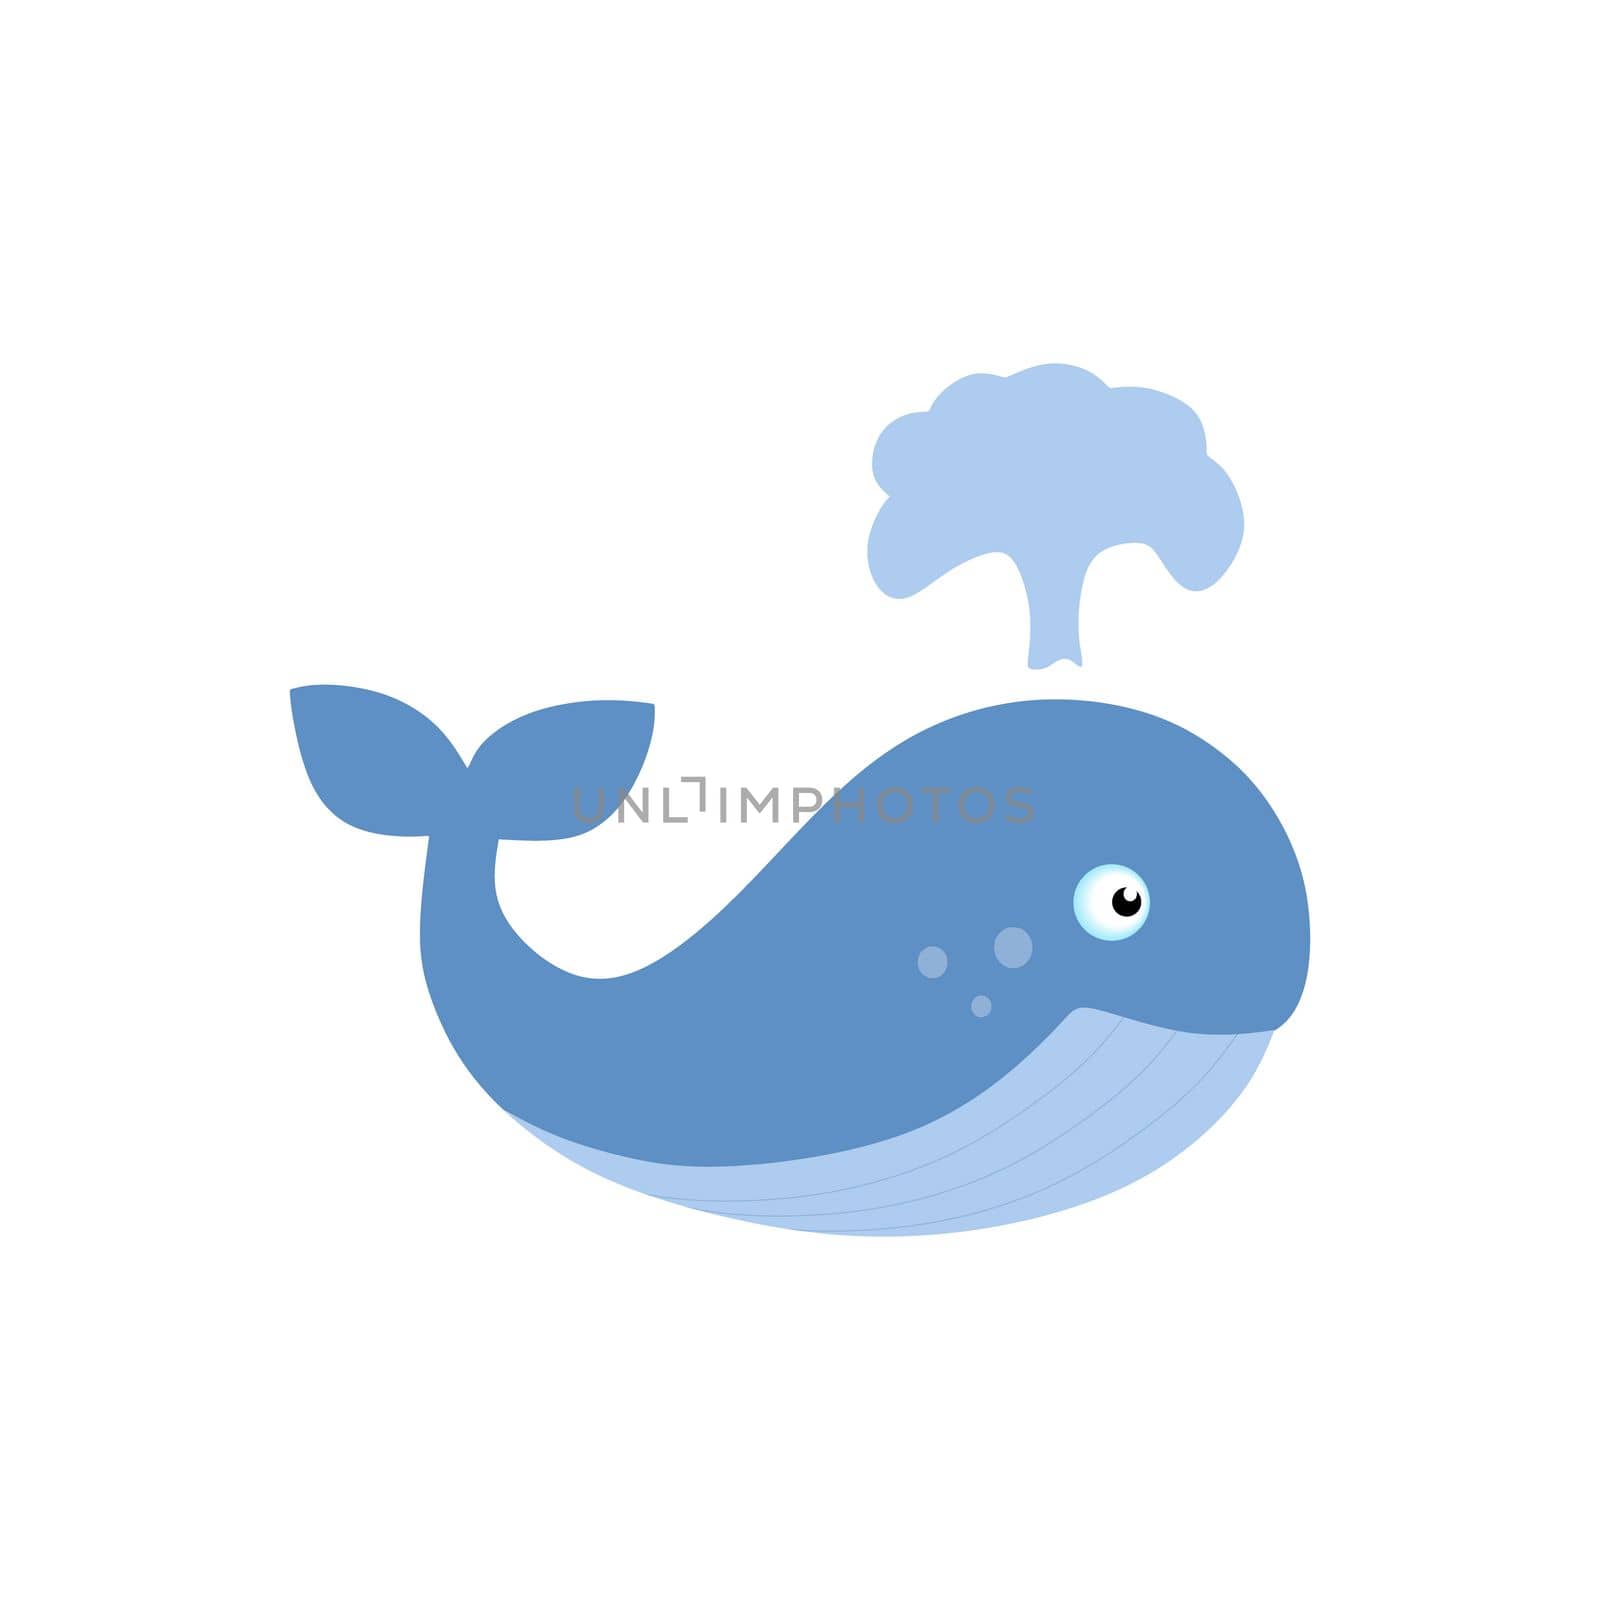 Cute whale isolated on white background. Children's cartoon vector illustration. Drawing for children's books, postcards, educational posters.